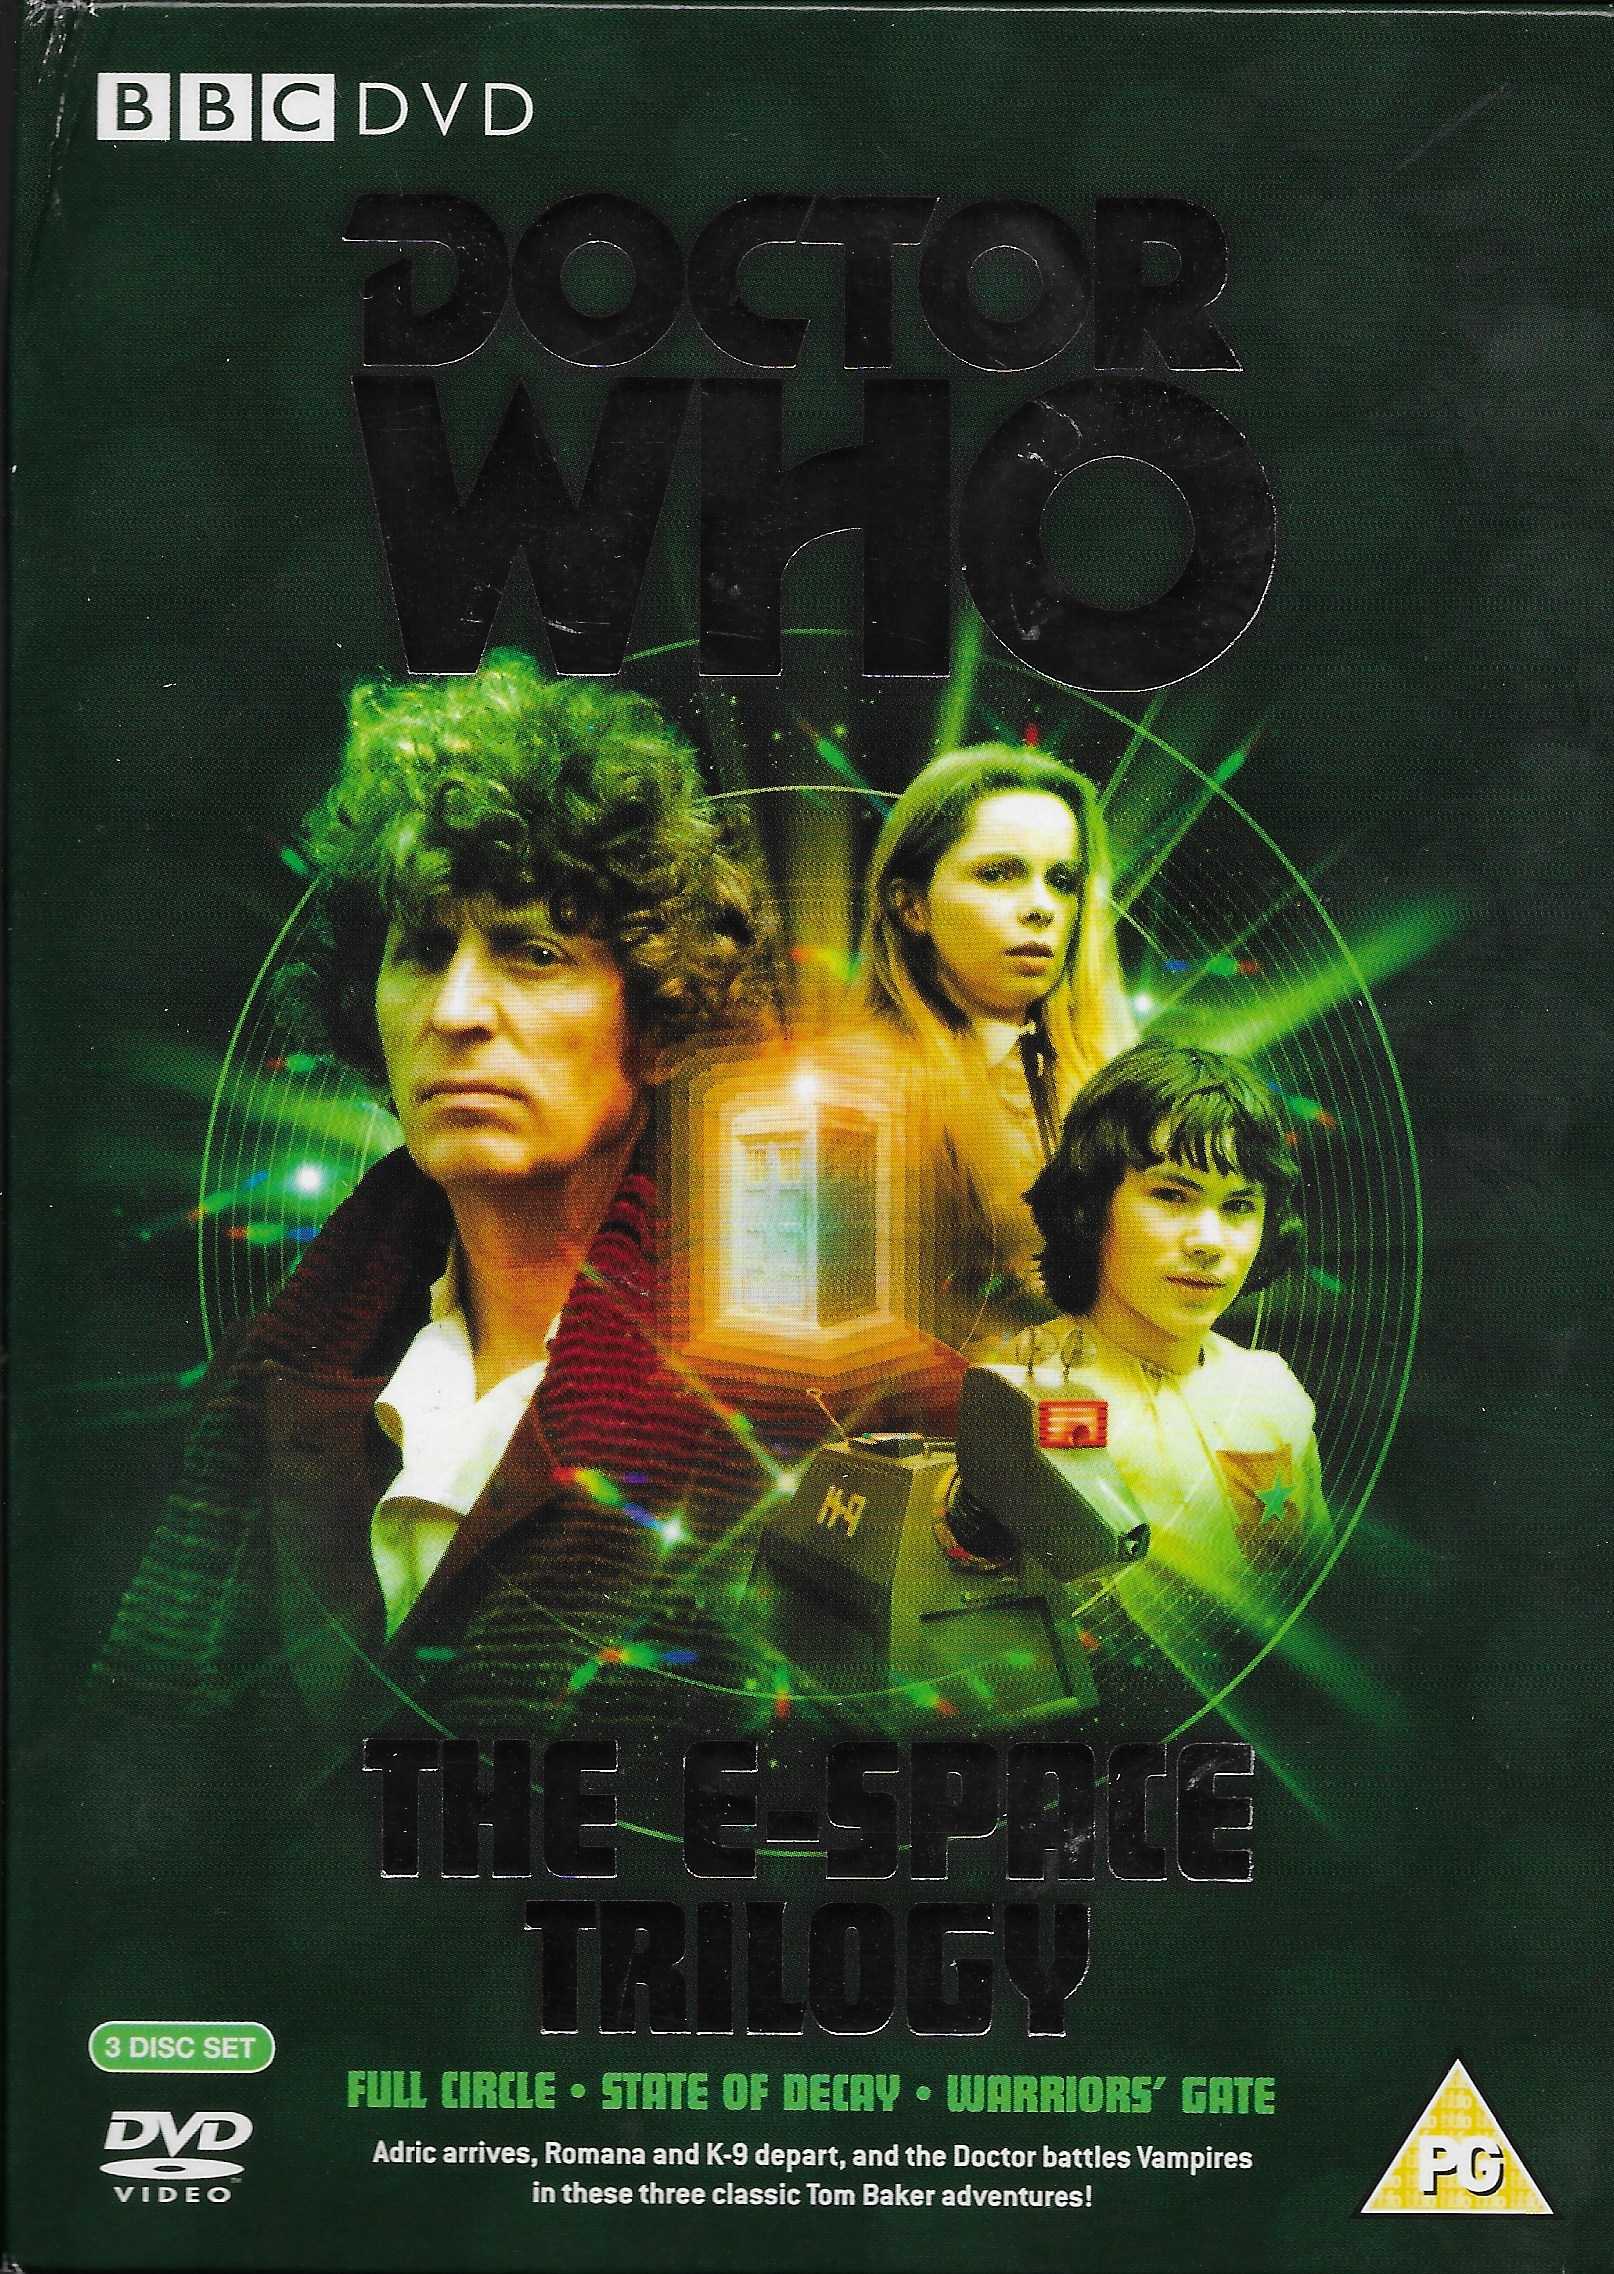 Picture of BBCDVD 1835 Doctor Who - The e-Space trilogy by artist Andrew Smith / Terrence Dicks / Steve Gallagher from the BBC records and Tapes library